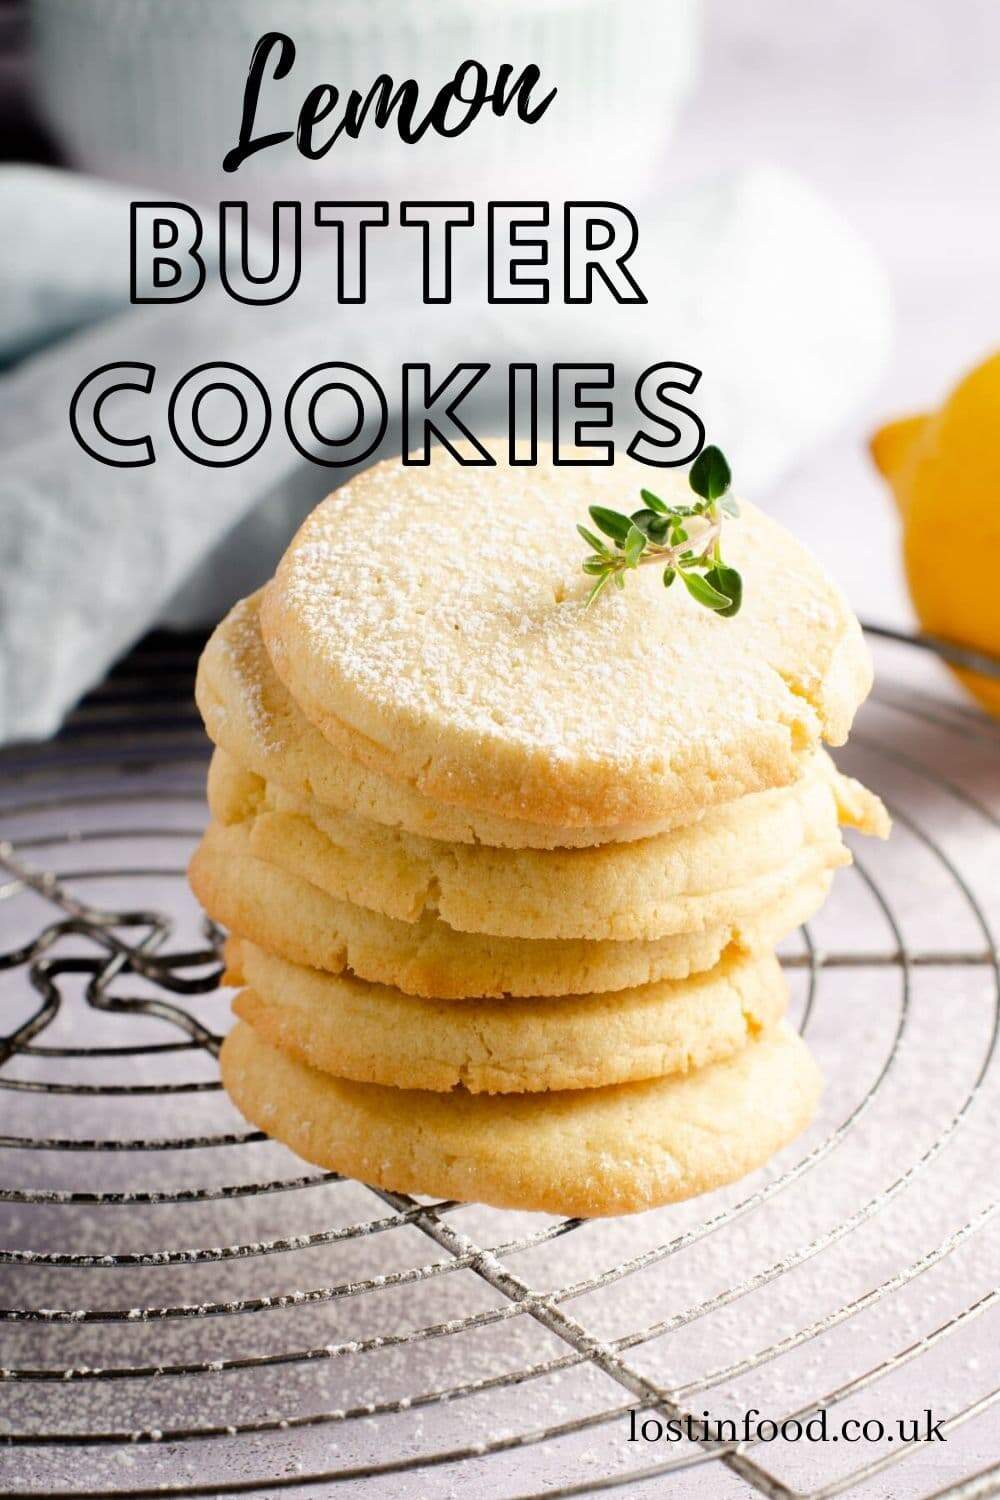 Lemon butter biscuits, delicious melt in the mouth biscuits fragrant with lemon. A simple bake making them a perfect afternoon tea treat. #simple #easy #lemonbutter